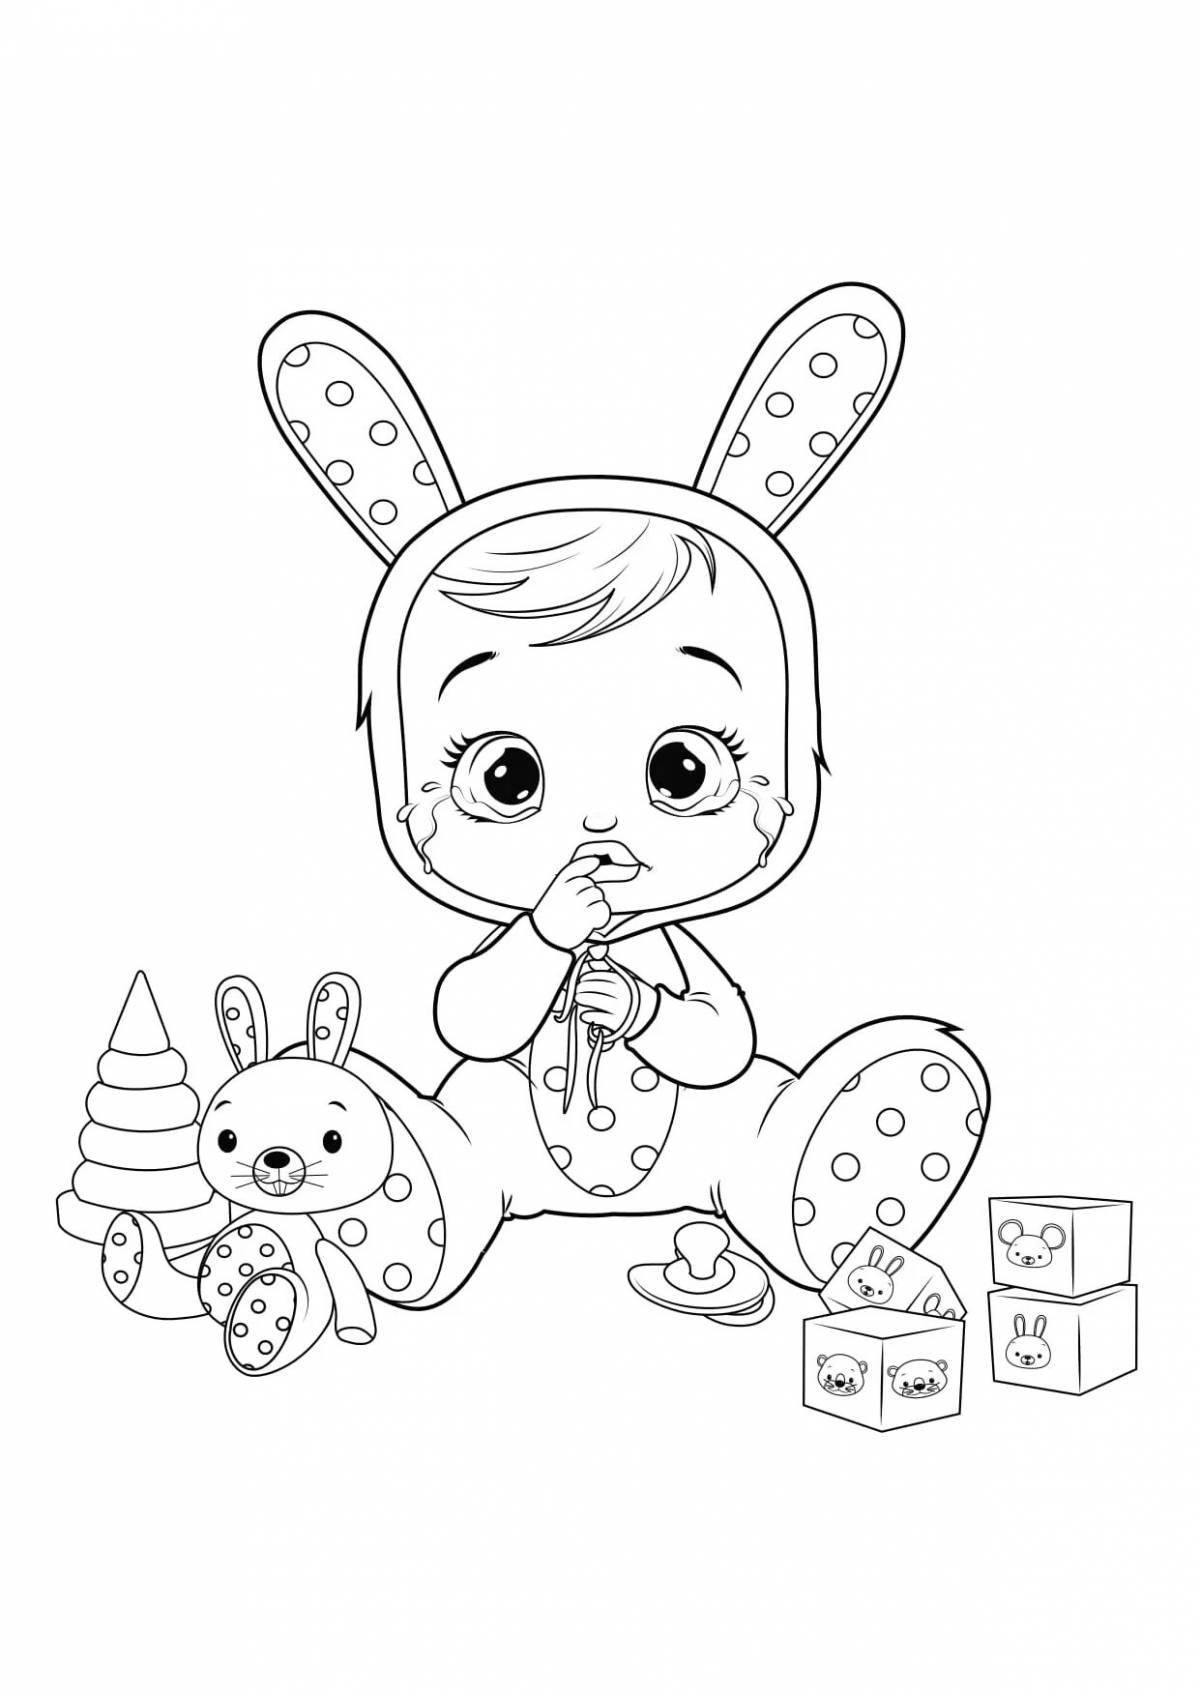 Snuggly puppy coloring page